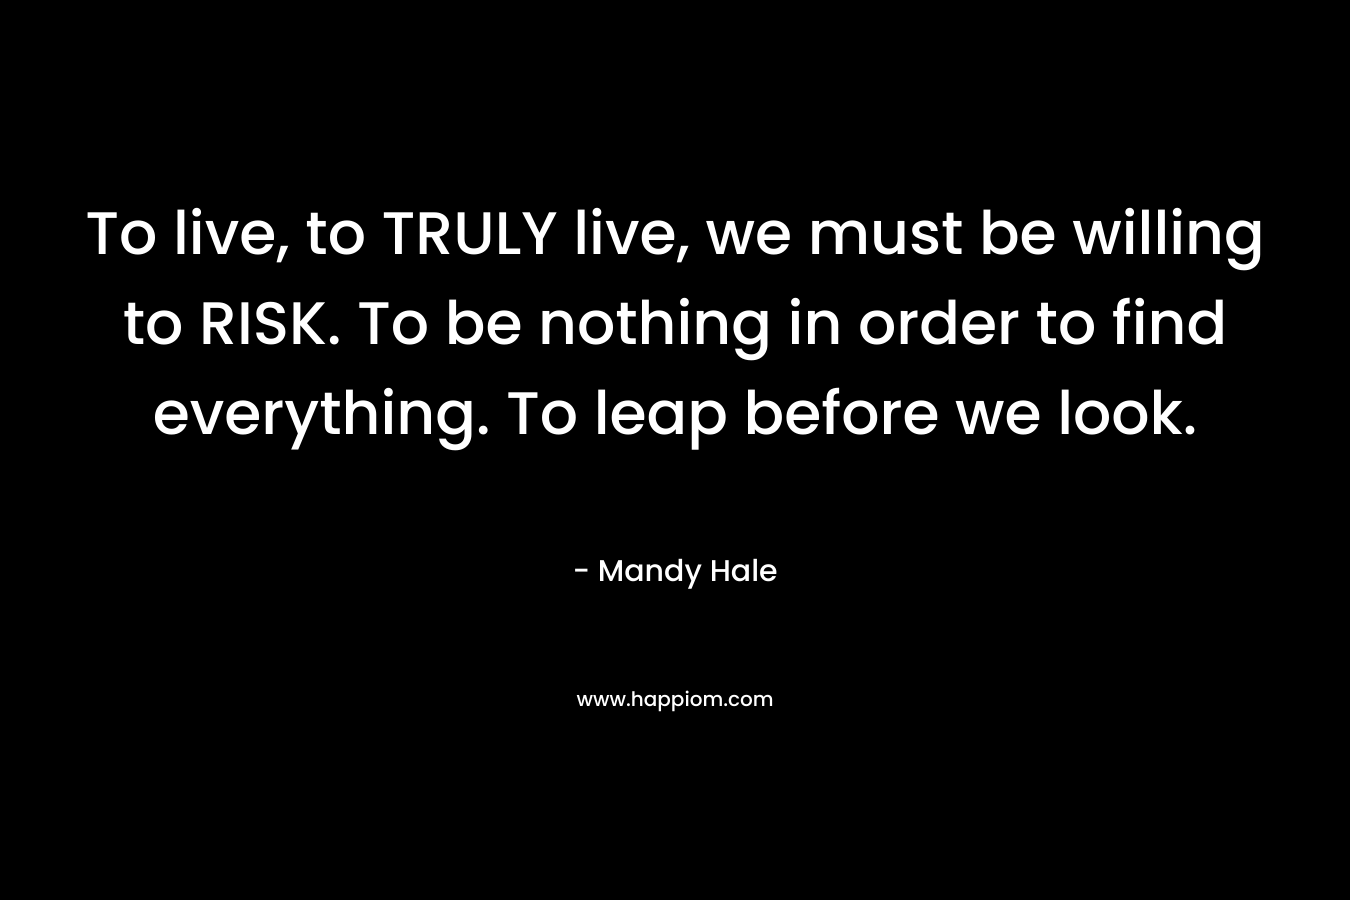 To live, to TRULY live, we must be willing to RISK. To be nothing in order to find everything. To leap before we look.